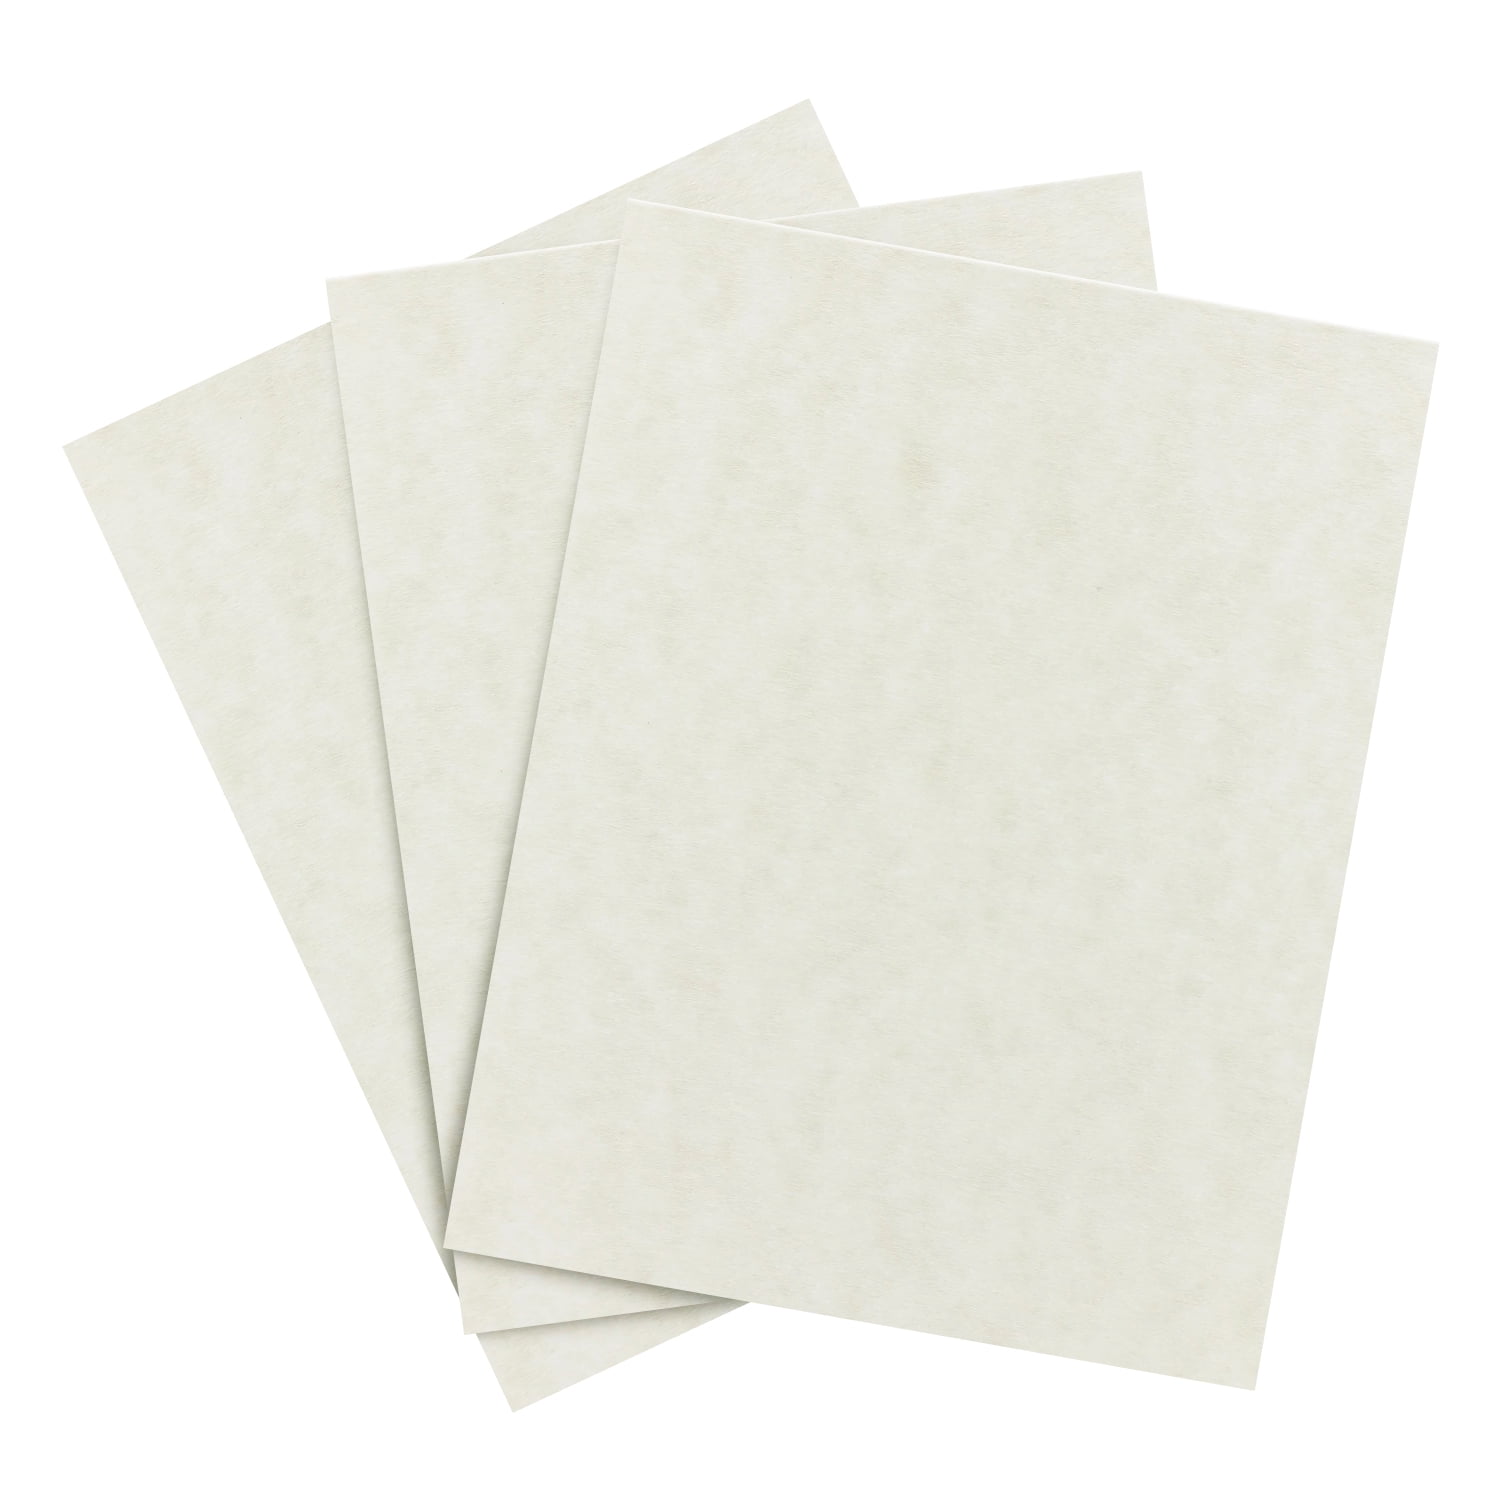 125 White Parchment 65lb Cover Weight Paper - 4 X 9 (4X9 Inches) 10  Envelope Insert Size - Printable Cardstock Colored Sheets Old Parchment  Semblance